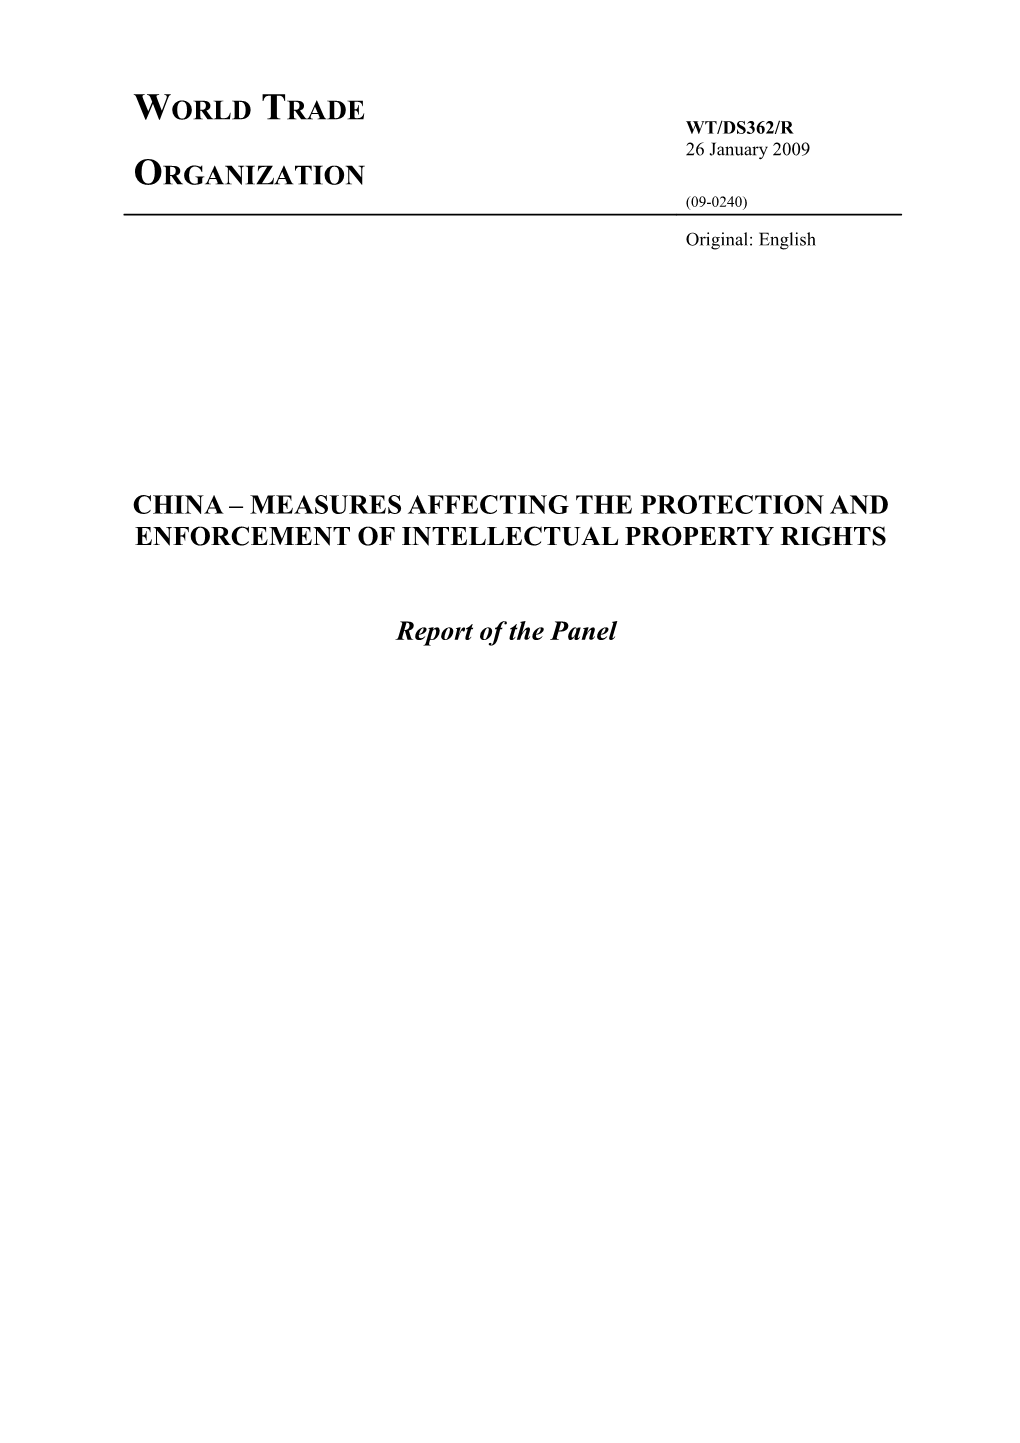 China Measures Affecting the Protection and Enforcement of Intellectual Property Rights